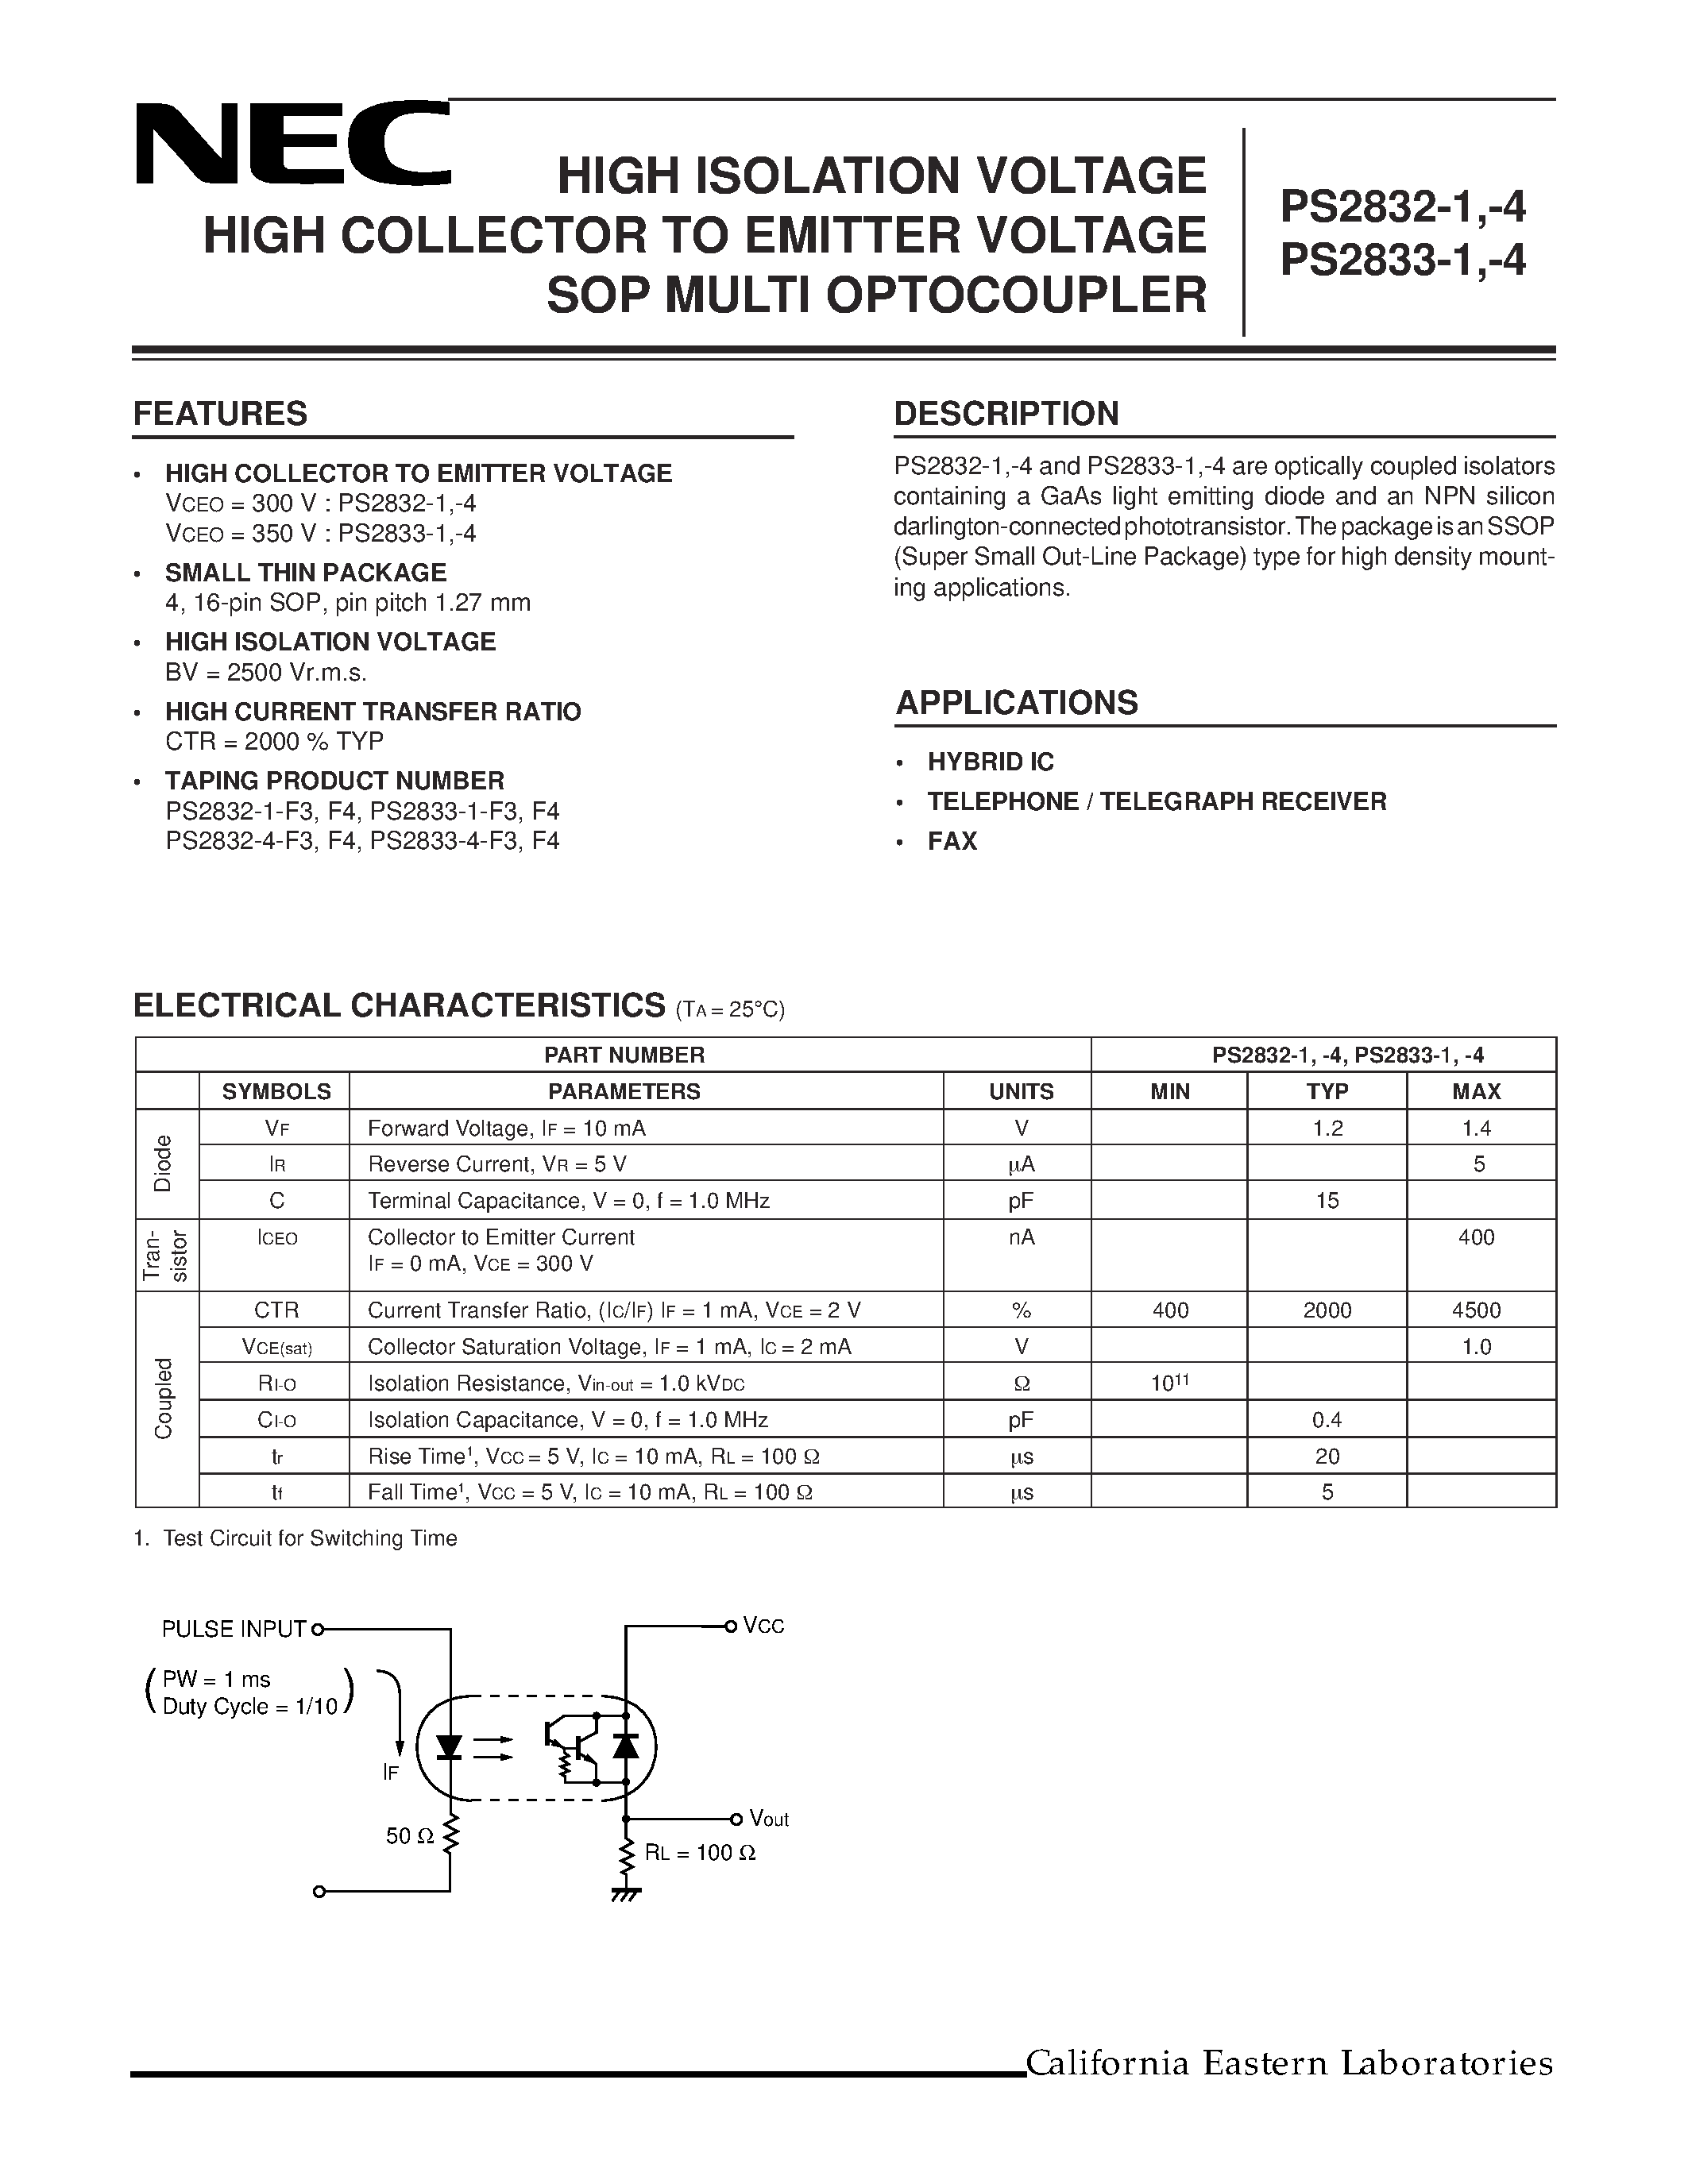 Datasheet PS2832-4-V-F4 - HIGH ISOLATION VOLTAGE HIGH COLLECTOR TO EMITTER VOLTAGE SOP MULTI OPTOCOUPLER page 1